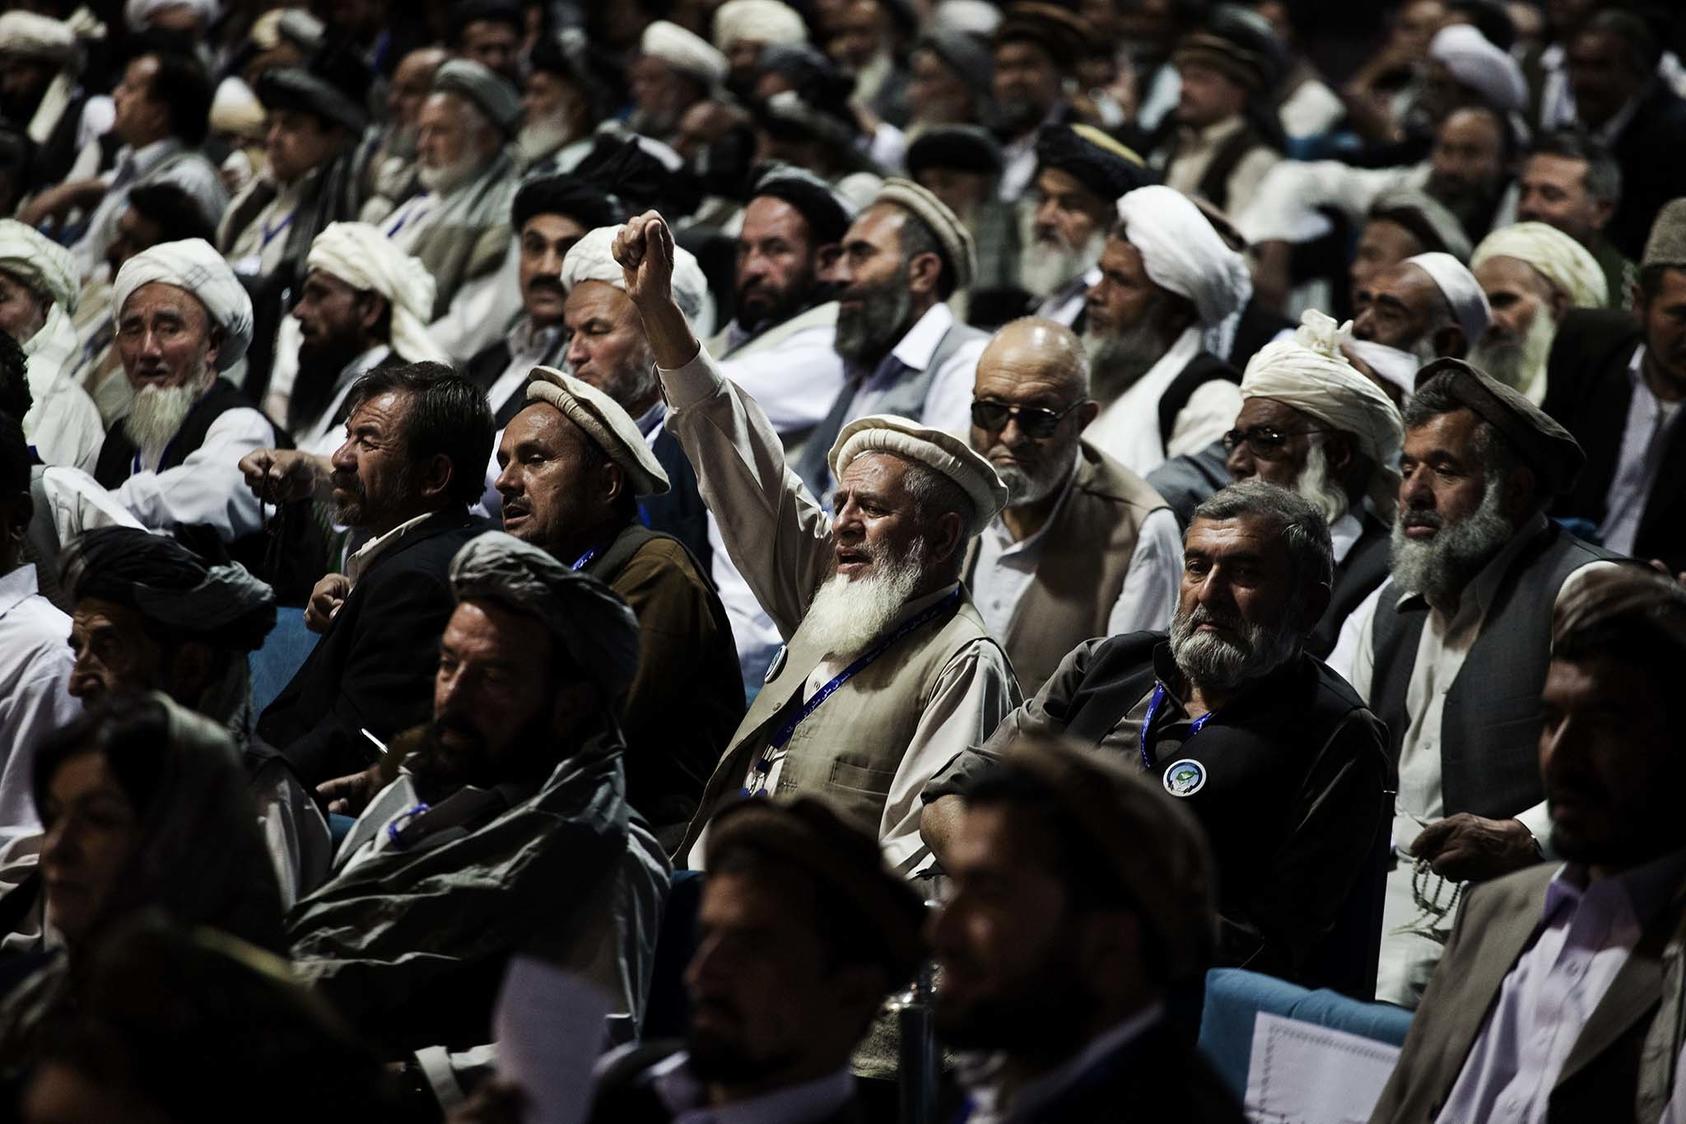 Delegates listen to talks at a national peace convention in Kabul, Afghanistan, on June 4, 2010. (Adam Ferguson/The New York Times)